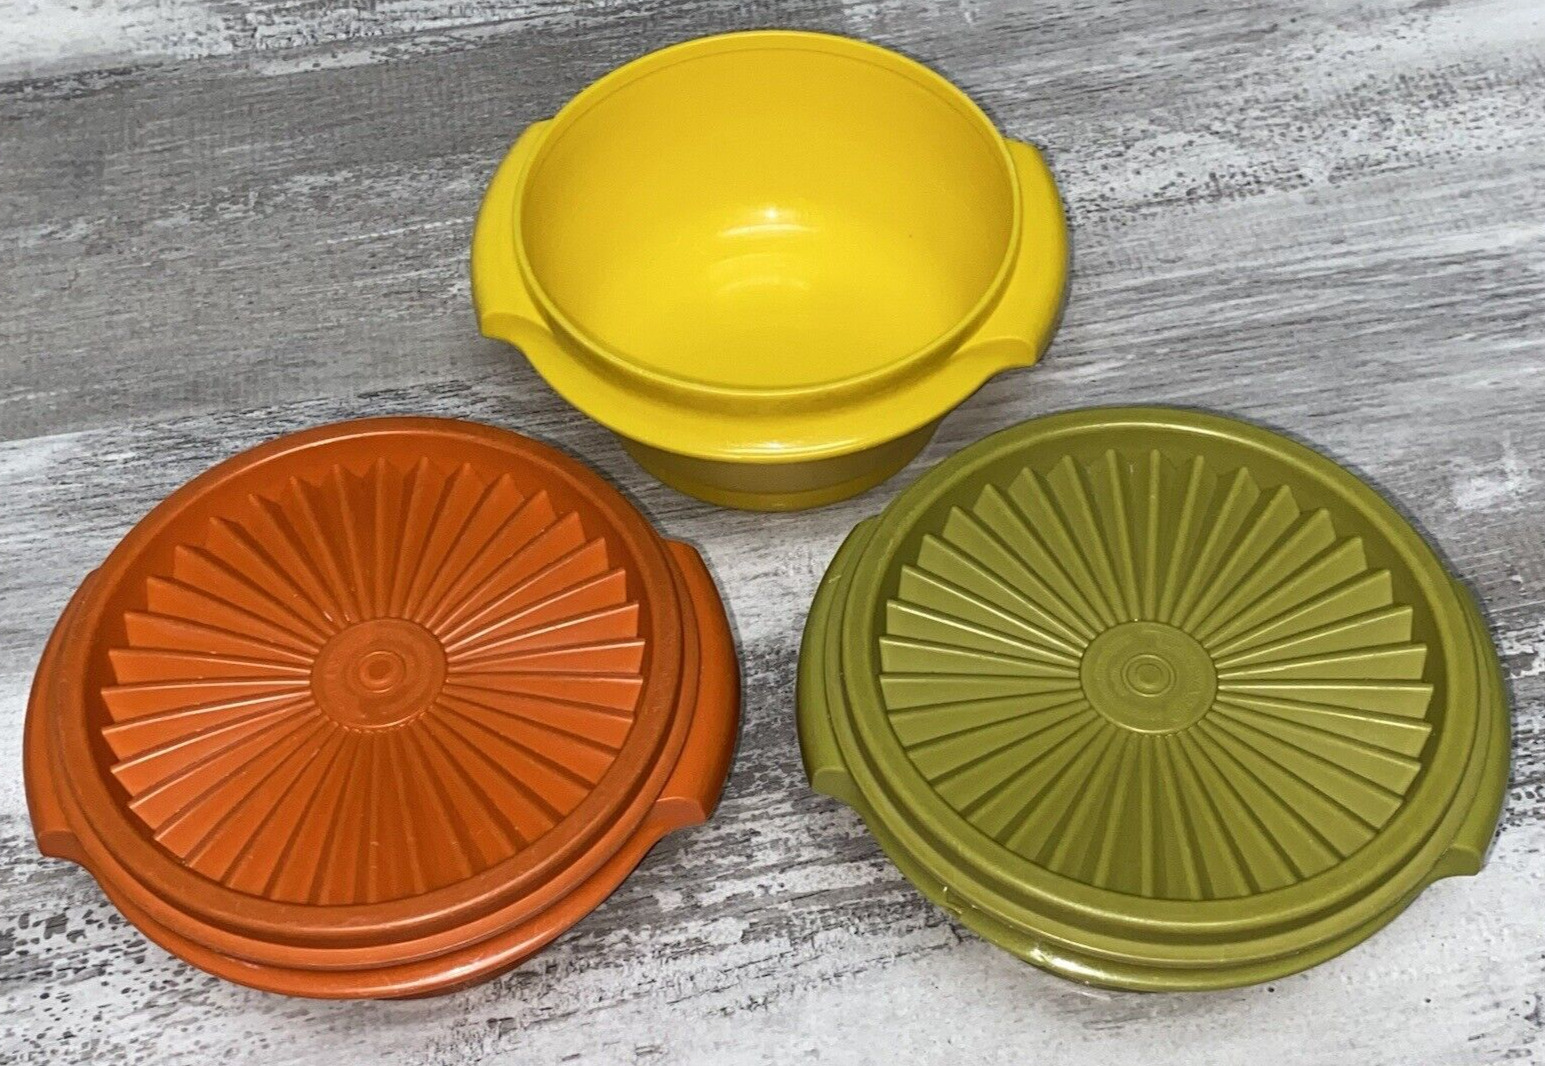 Vtg Tupperware Servalier Containers Bowls Lids Harvest Yellow Green Orange Lot 3